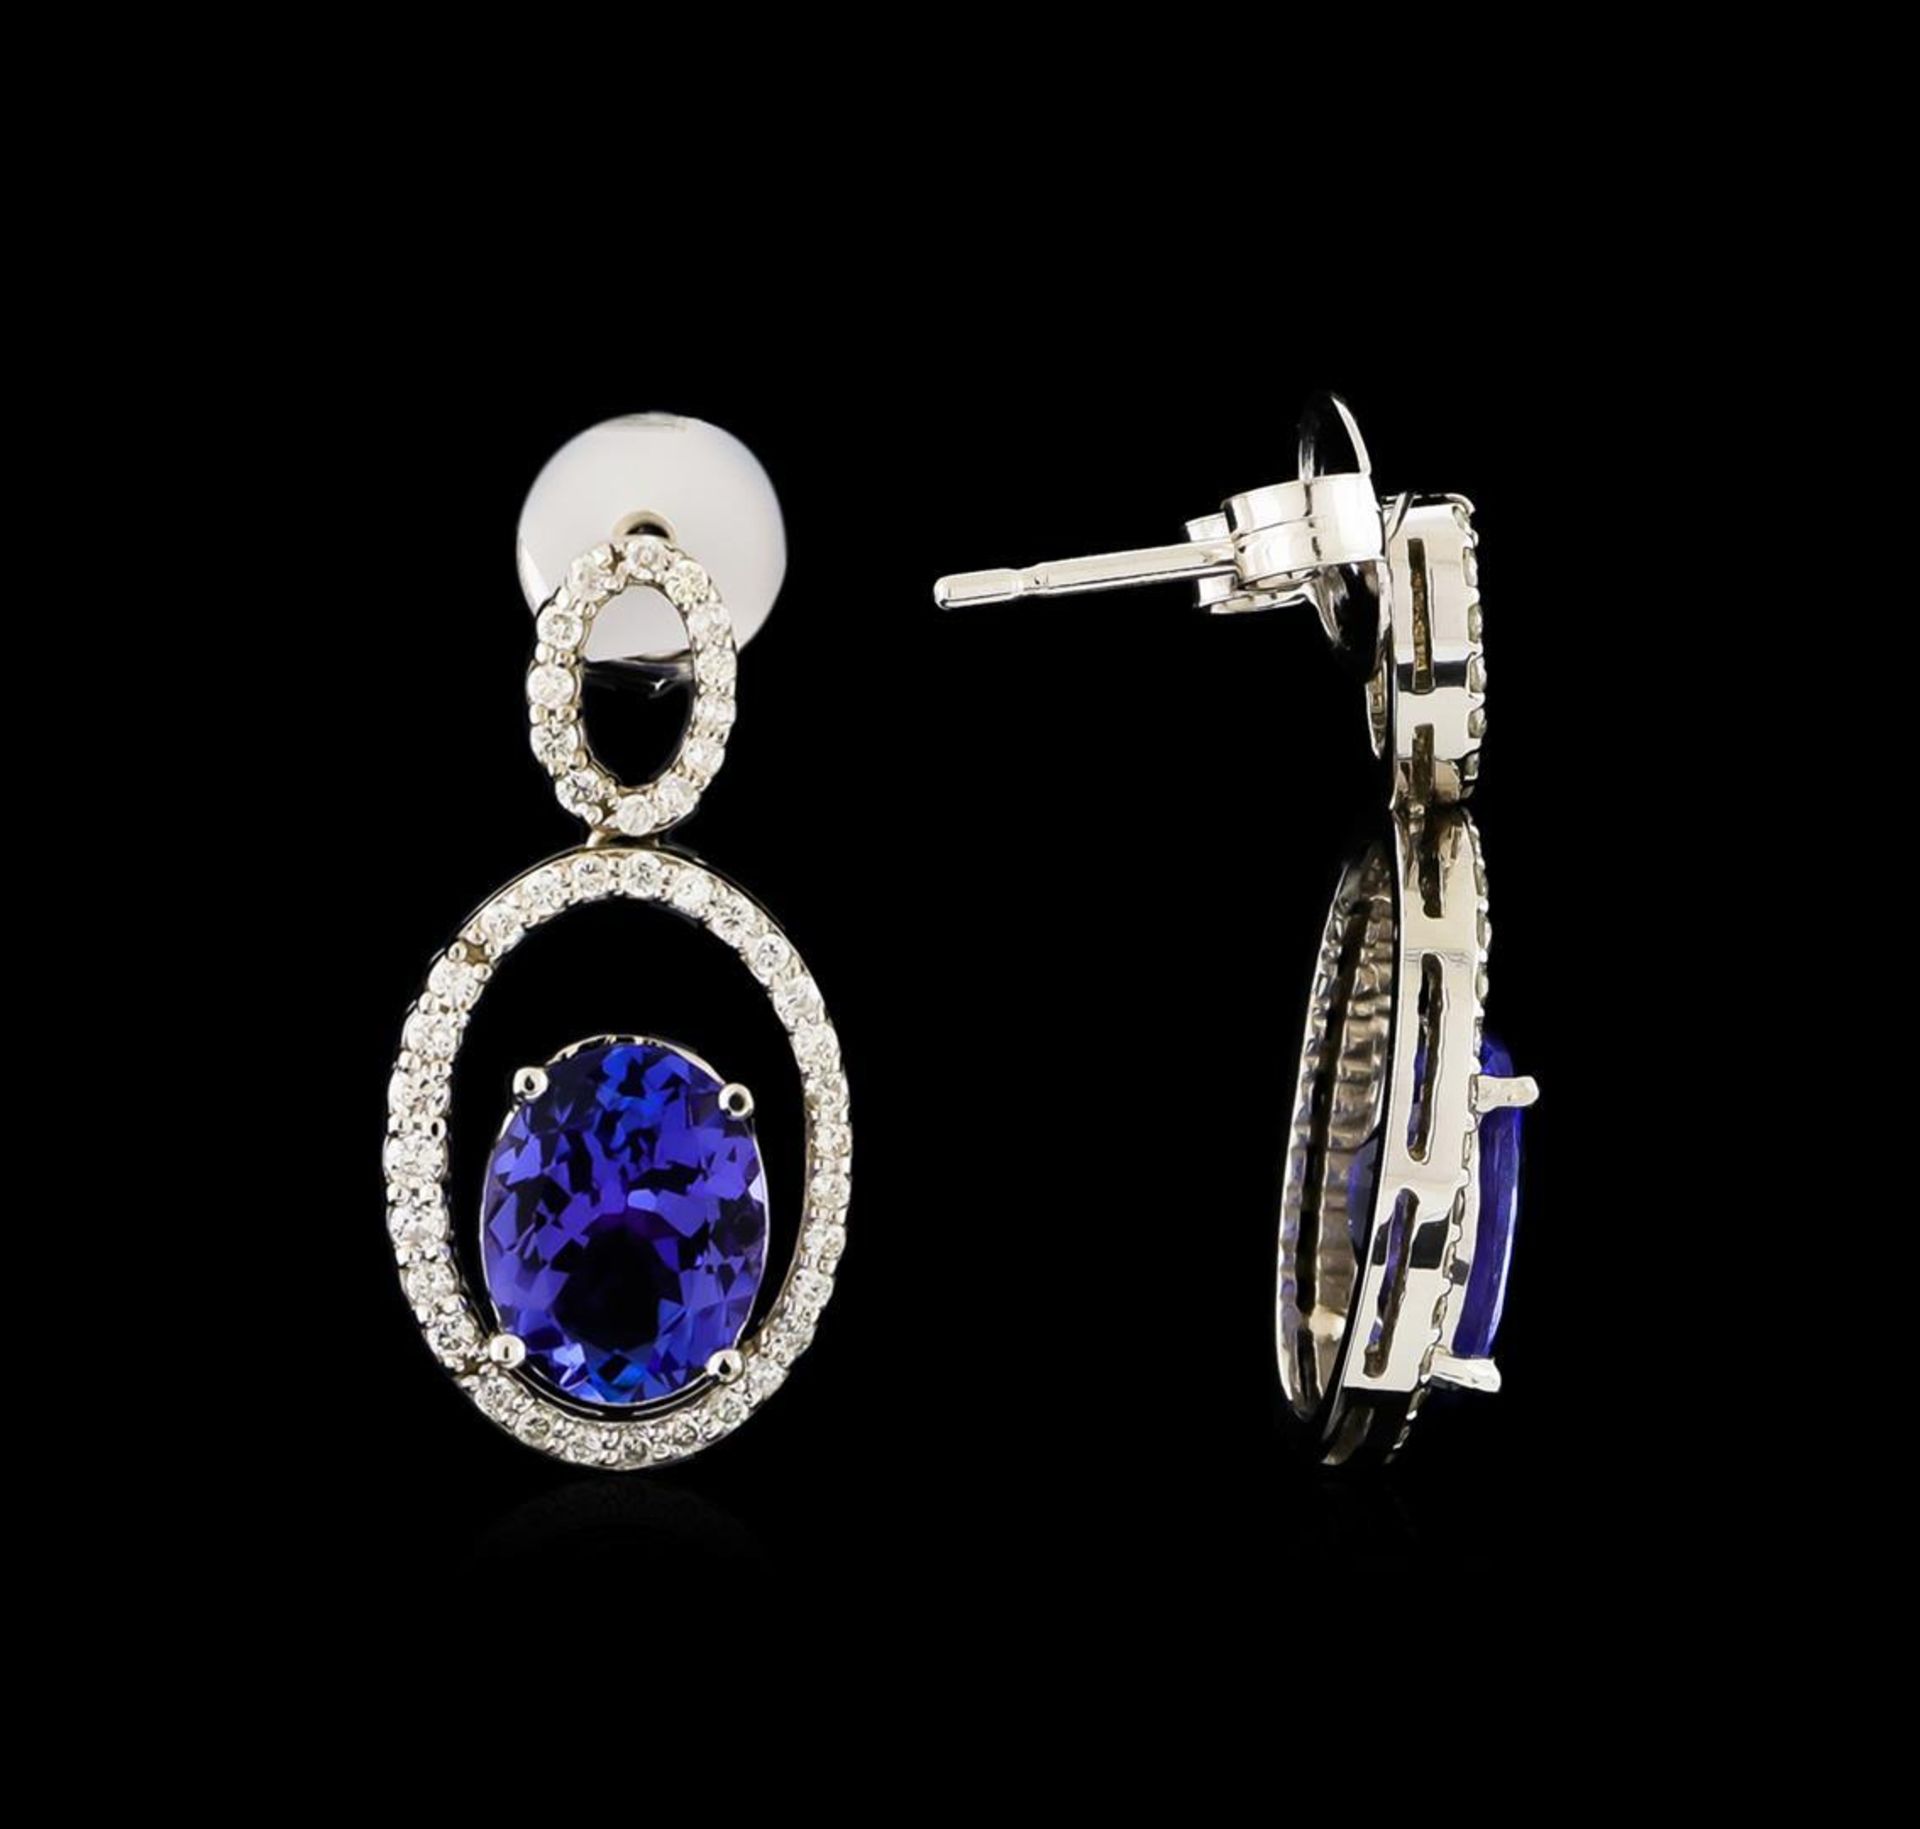 3.58ctw Tanzanite and Diamond Earrings - 14KT White Gold - Image 2 of 3